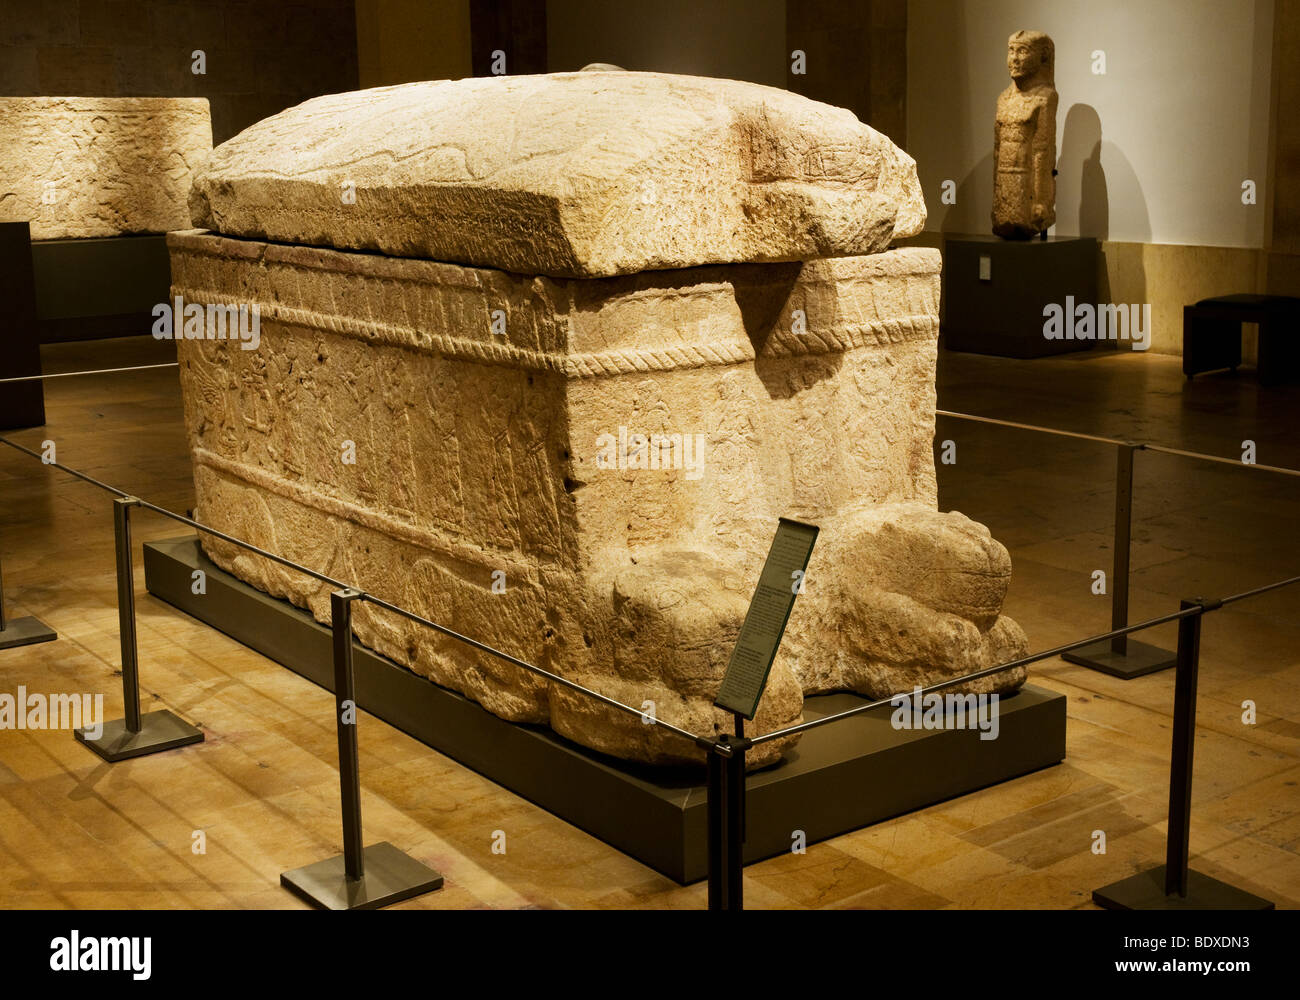 The Sarcophagus of Ahiram, King of Byblos, which features on its lid the oldest text written in the Phoenician alphabet Stock Photo